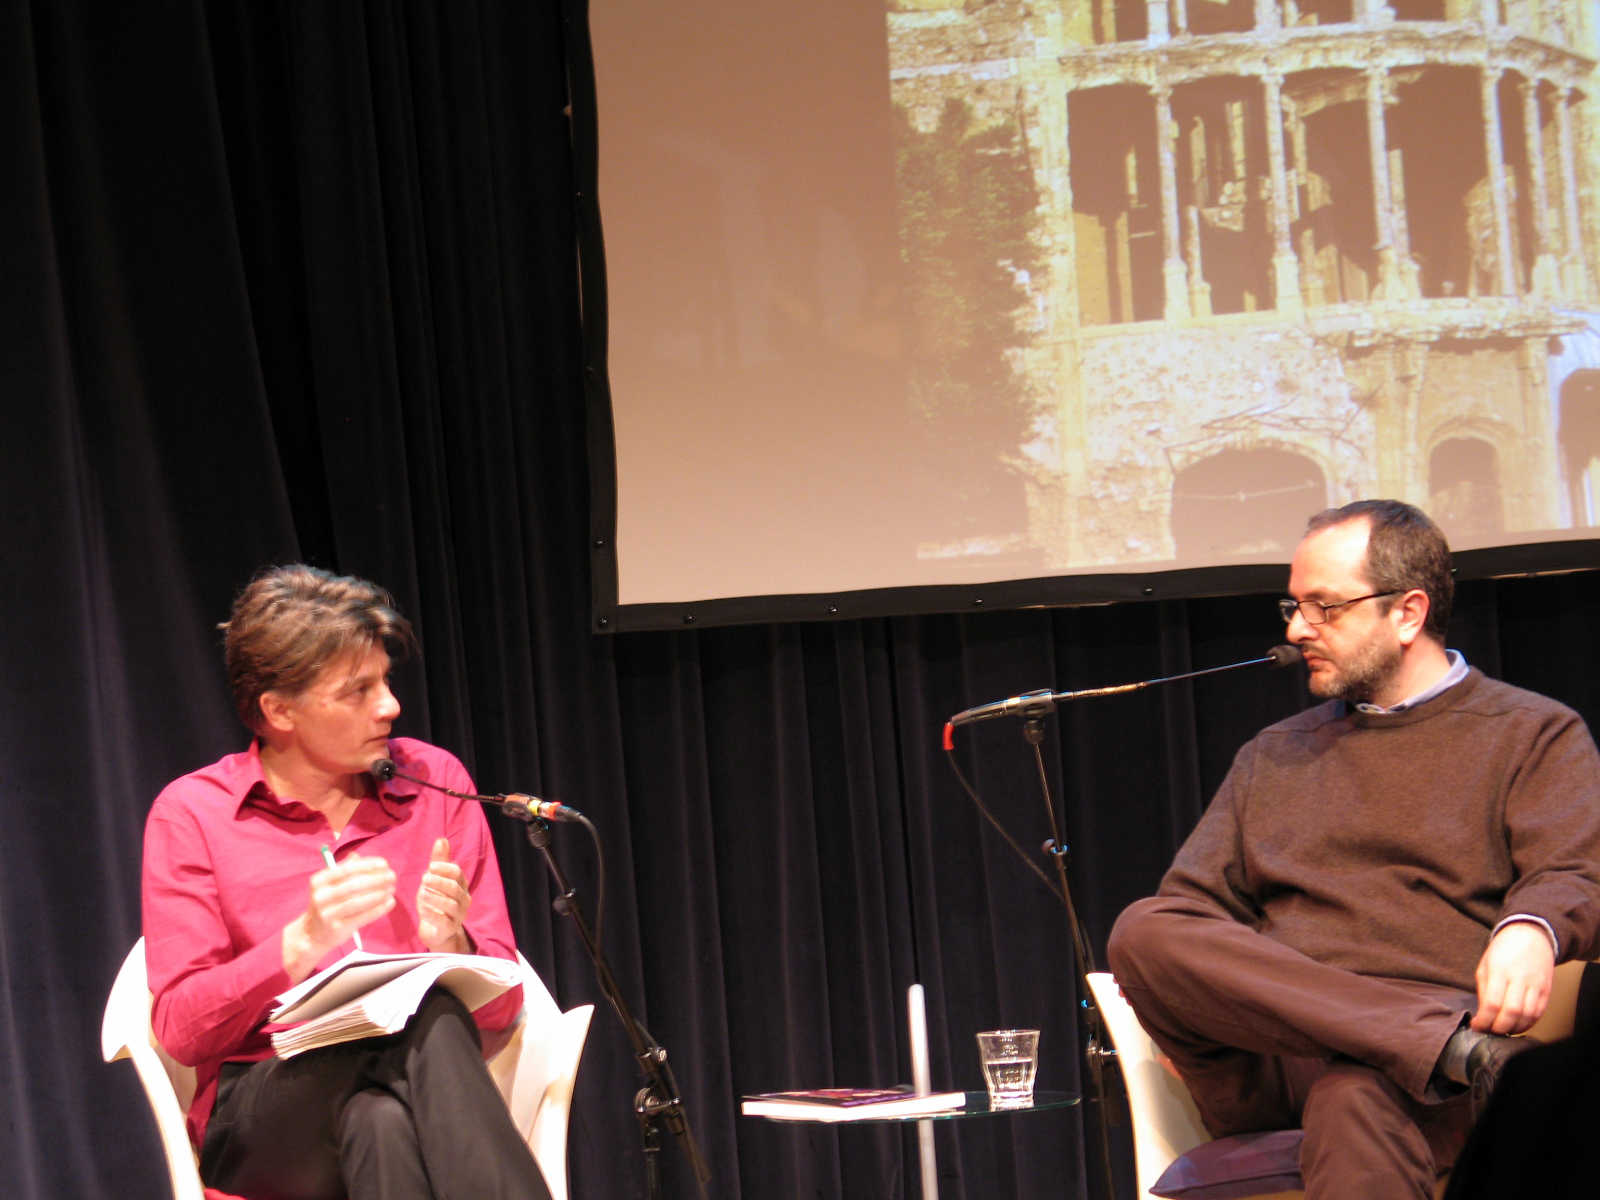 Tony Chakar interviewed by Chris Keulemans  at the Balie in Amsterdam